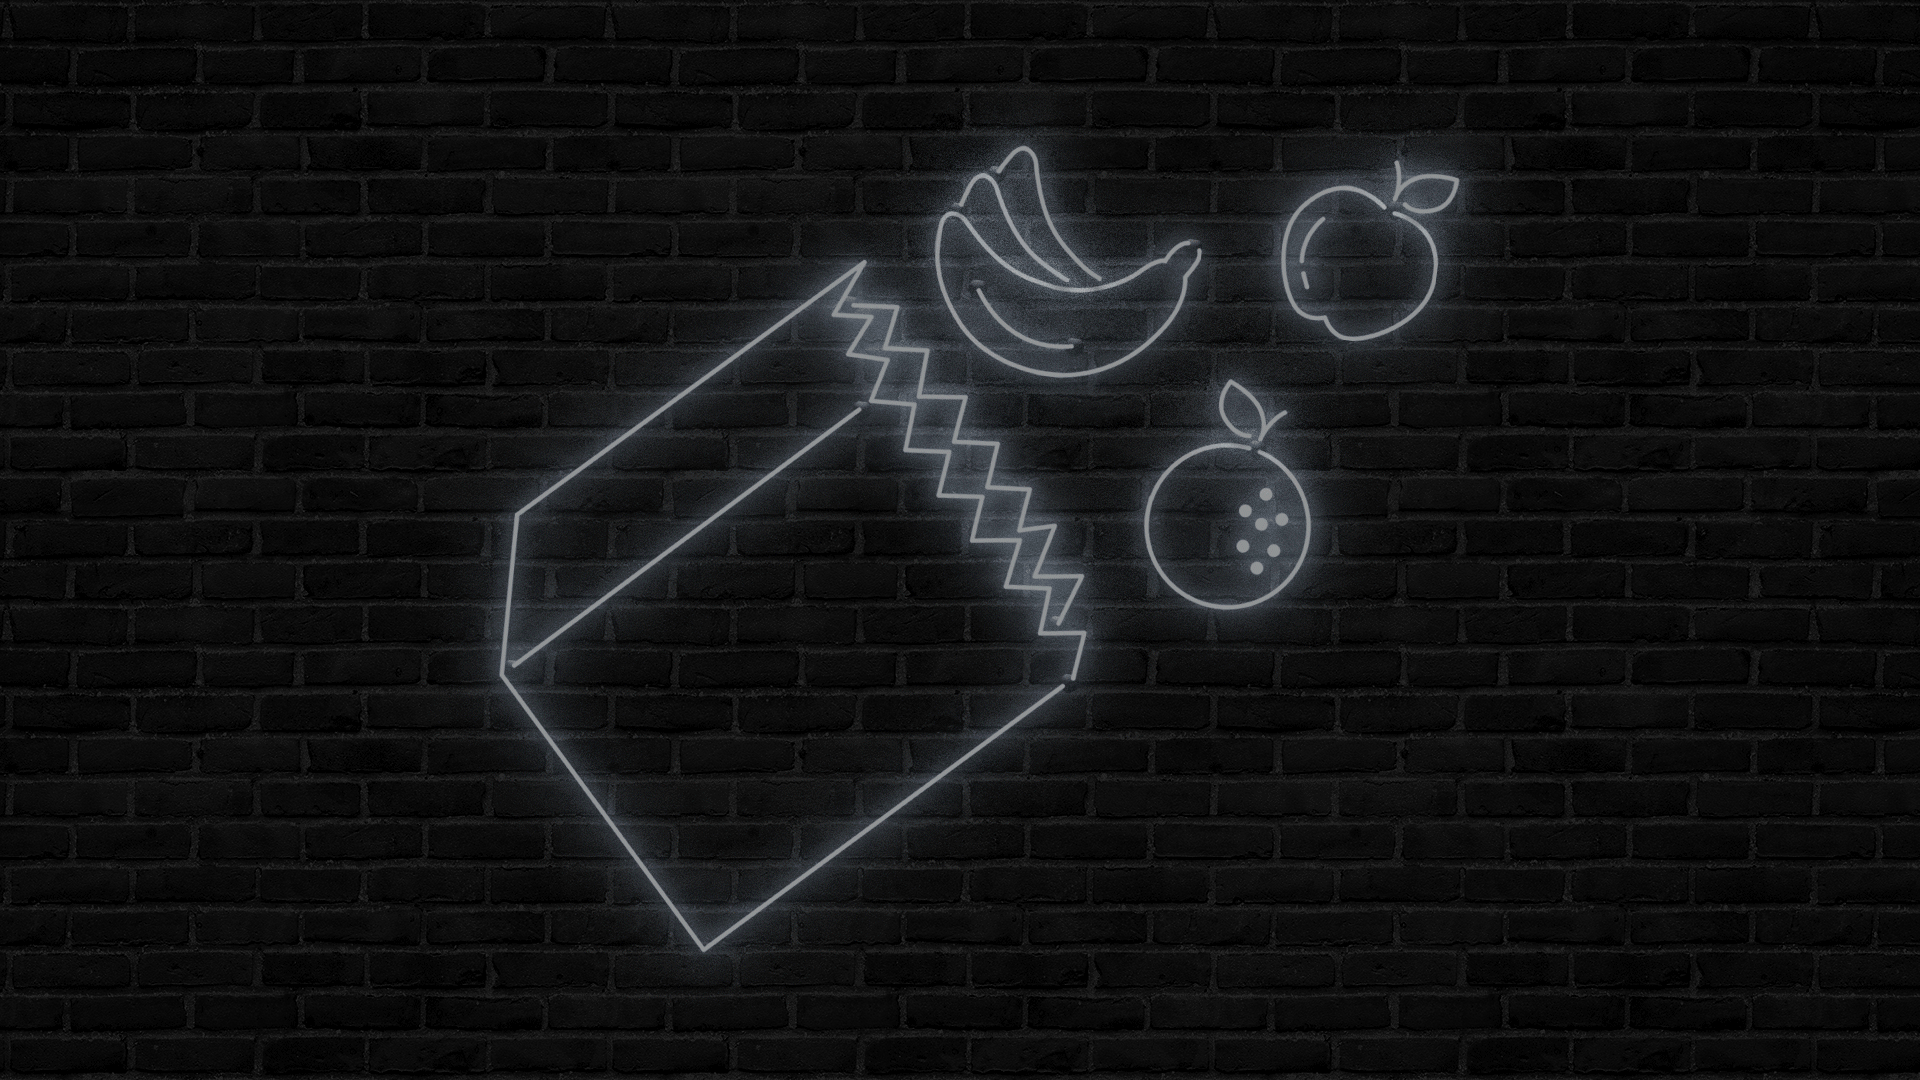 Animated illustration of a neon sign with a brown paper bag and fruit flying out.  